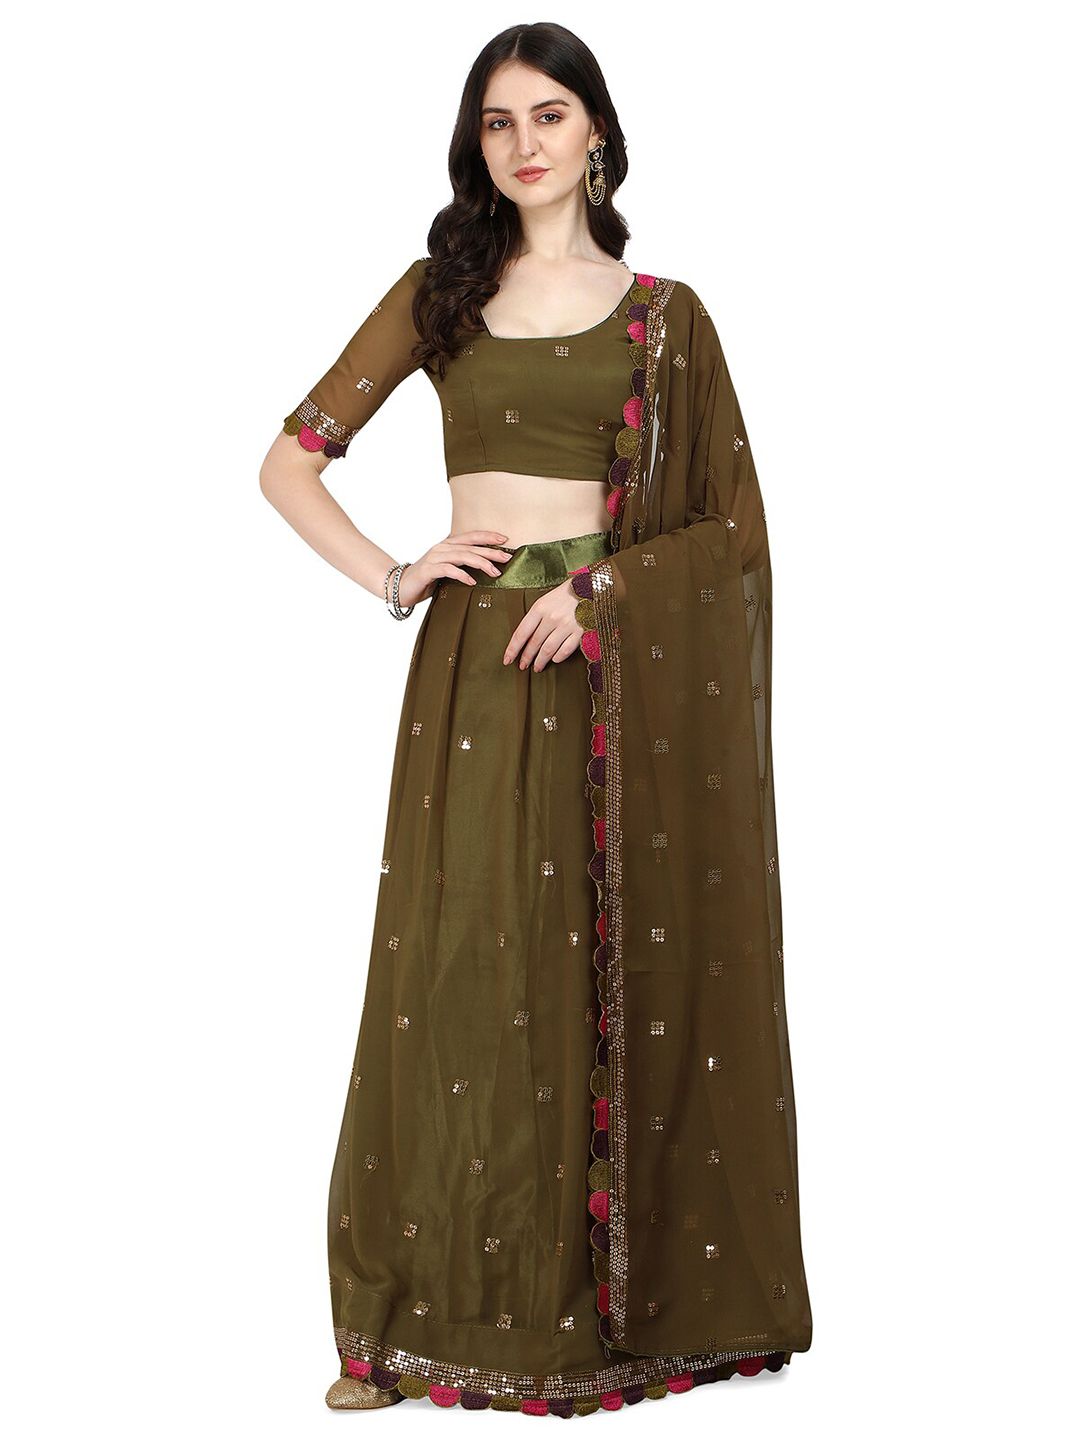 Pratham Blue Olive Green Embroidered Sequinned Semi-Stitched Lehenga & Unstitched Blouse With Dupatta Price in India